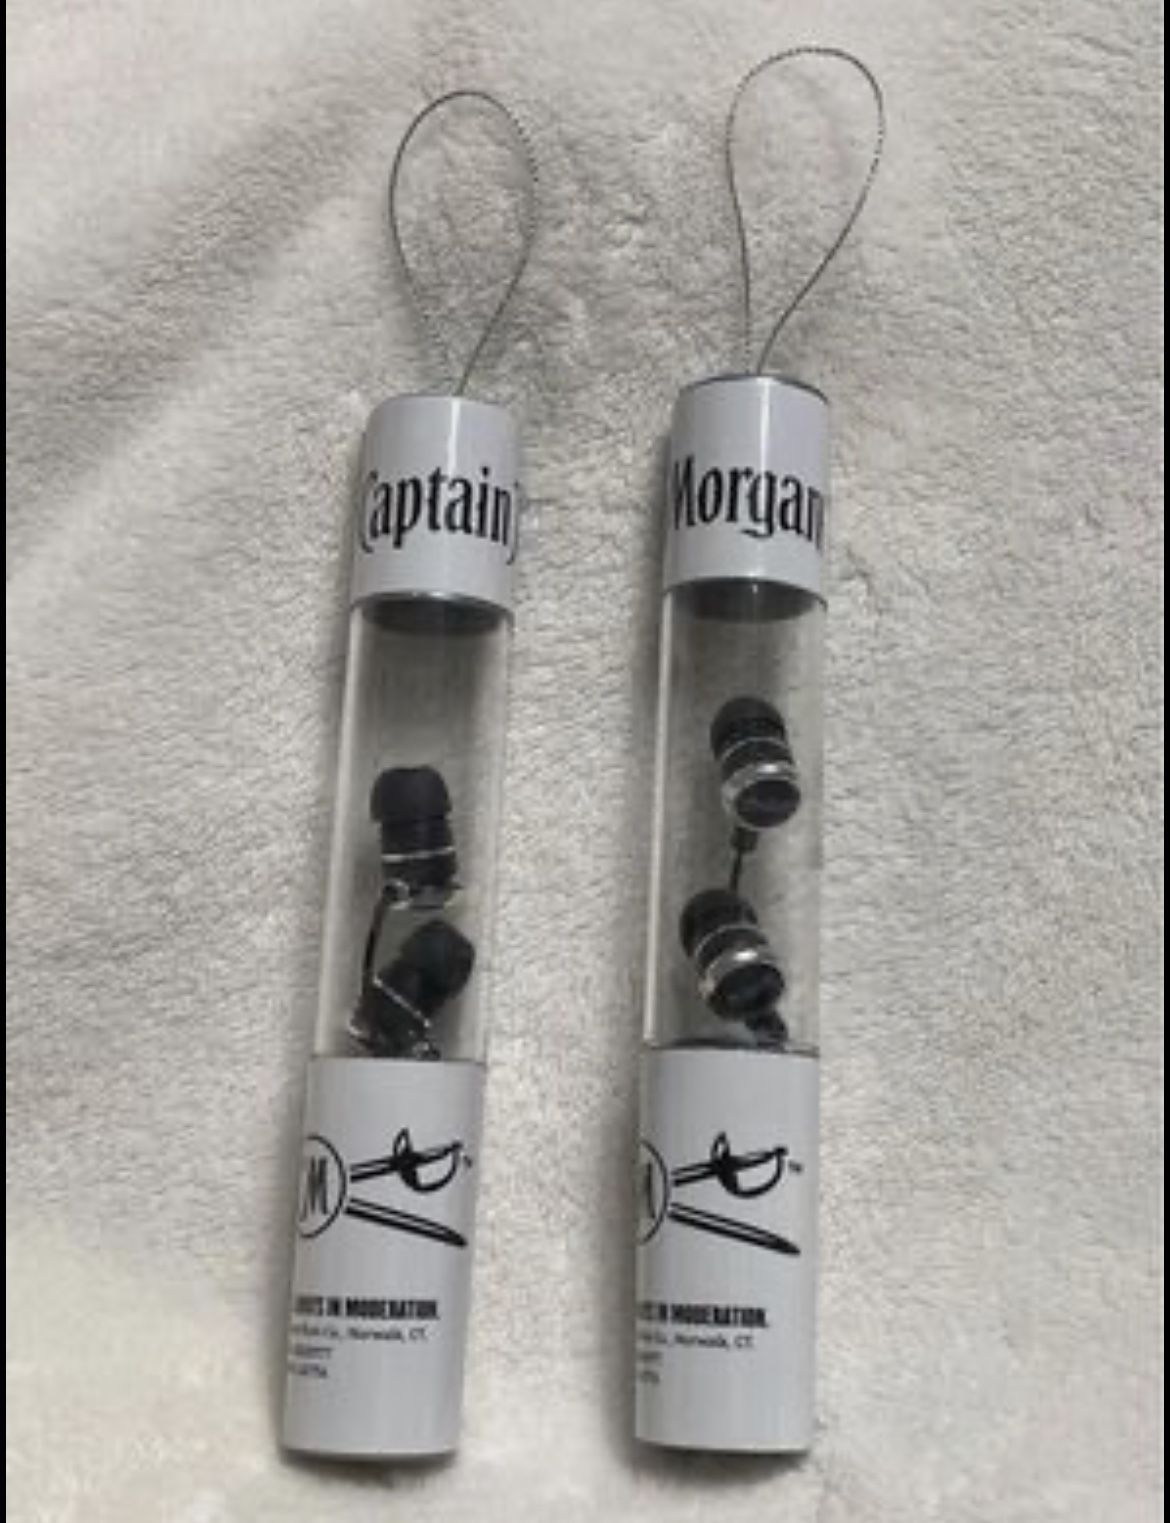 Captain Morgan Earbuds - 2 Pair, to be sold as a set of 2